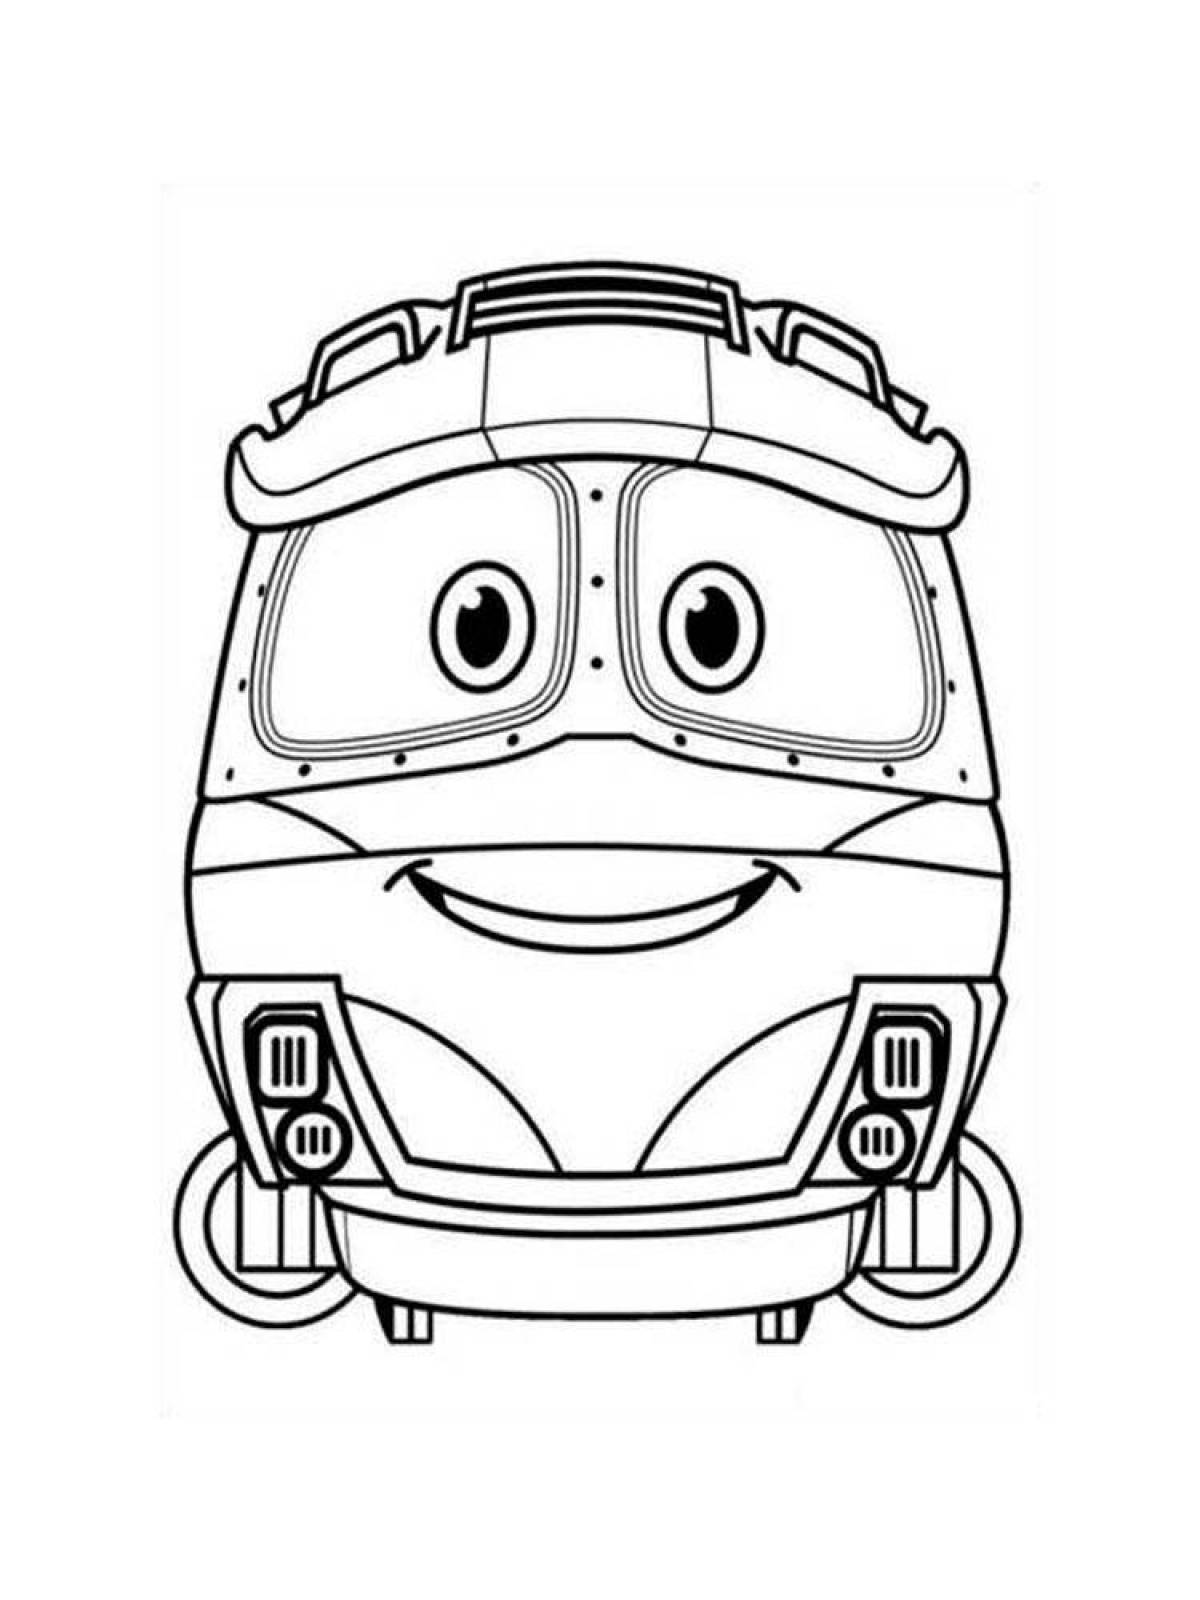 Colorful robotic trains coloring pages for kids